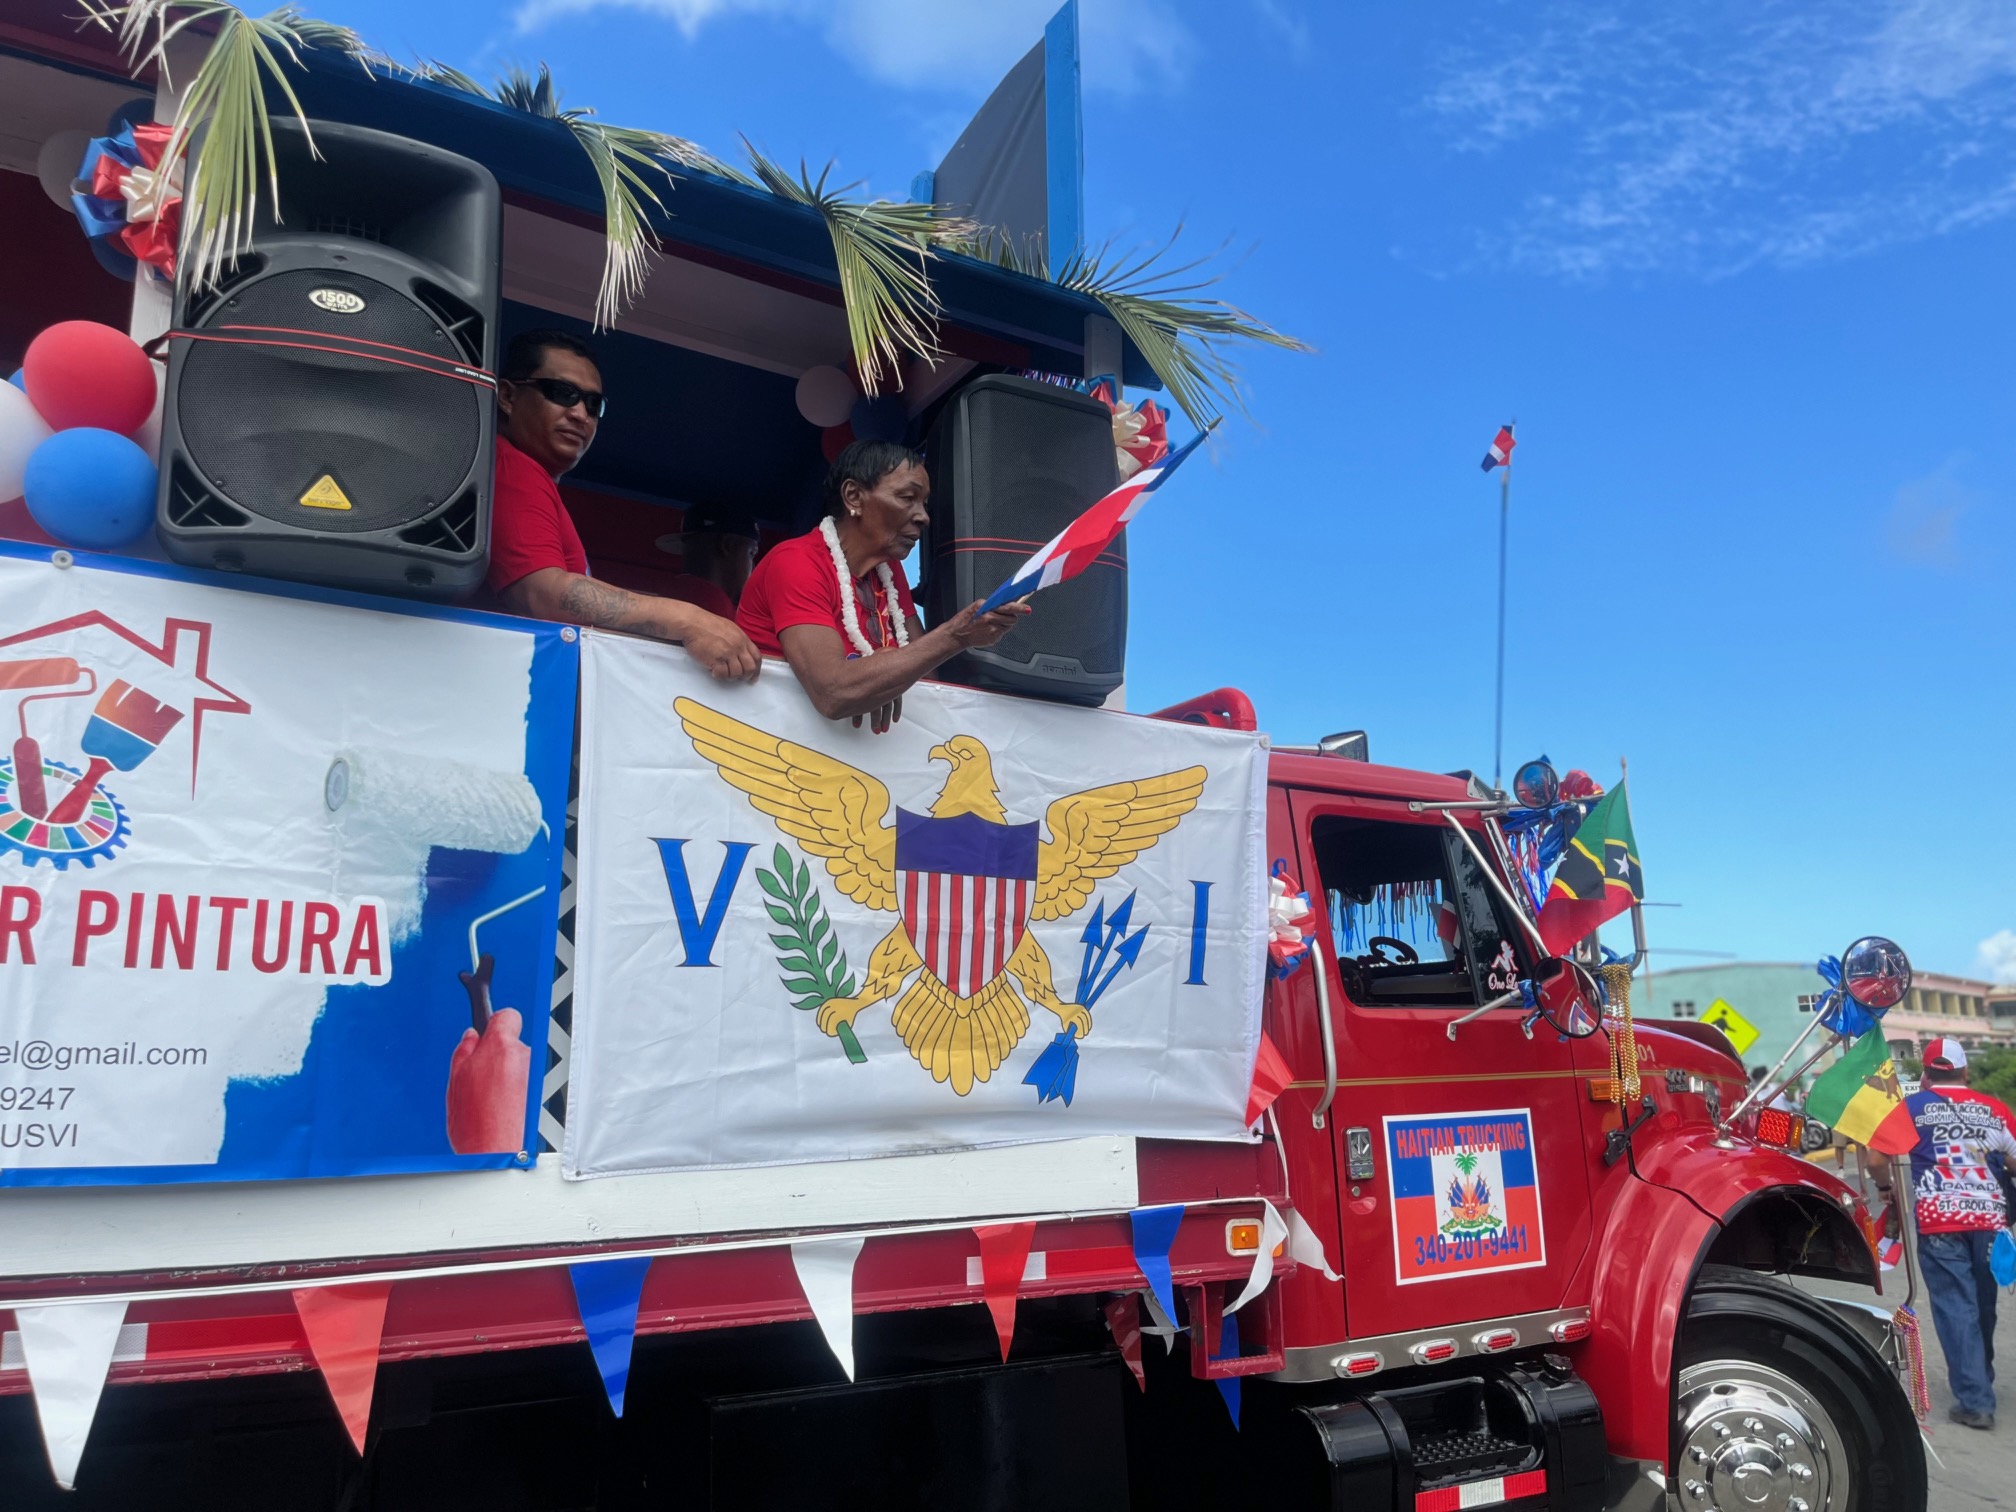 Photo Focus Crowds Celebrate Dominican Republic Independence Day